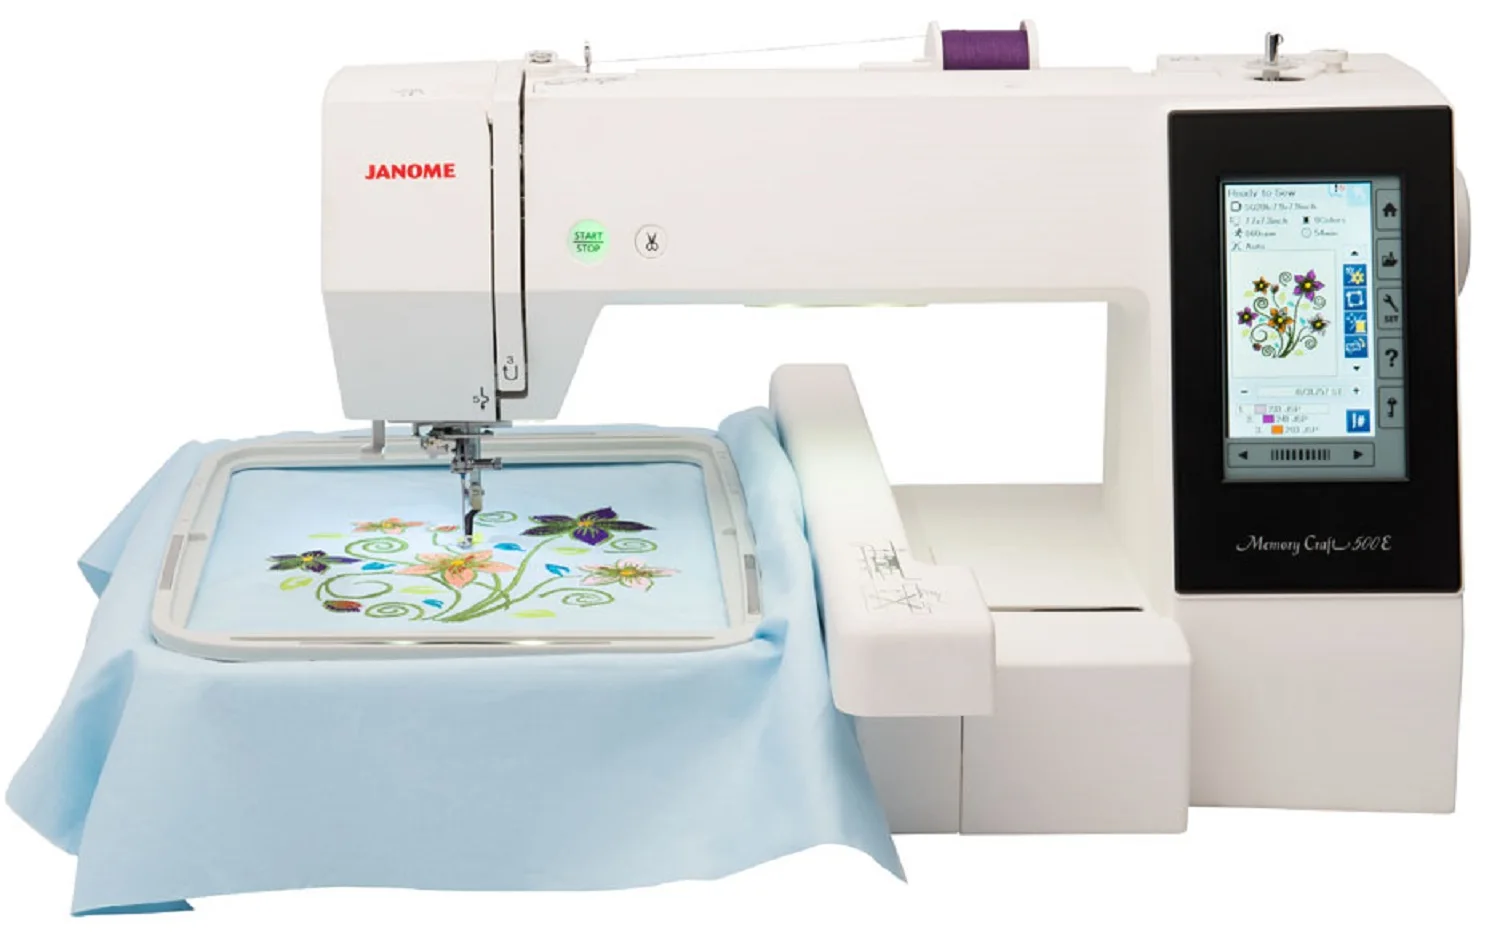 Summer discount of 50% HOT SALES FOR Janome Memory Craft 500E Embroidery Machine for industrial embroidery machines for sal Hot